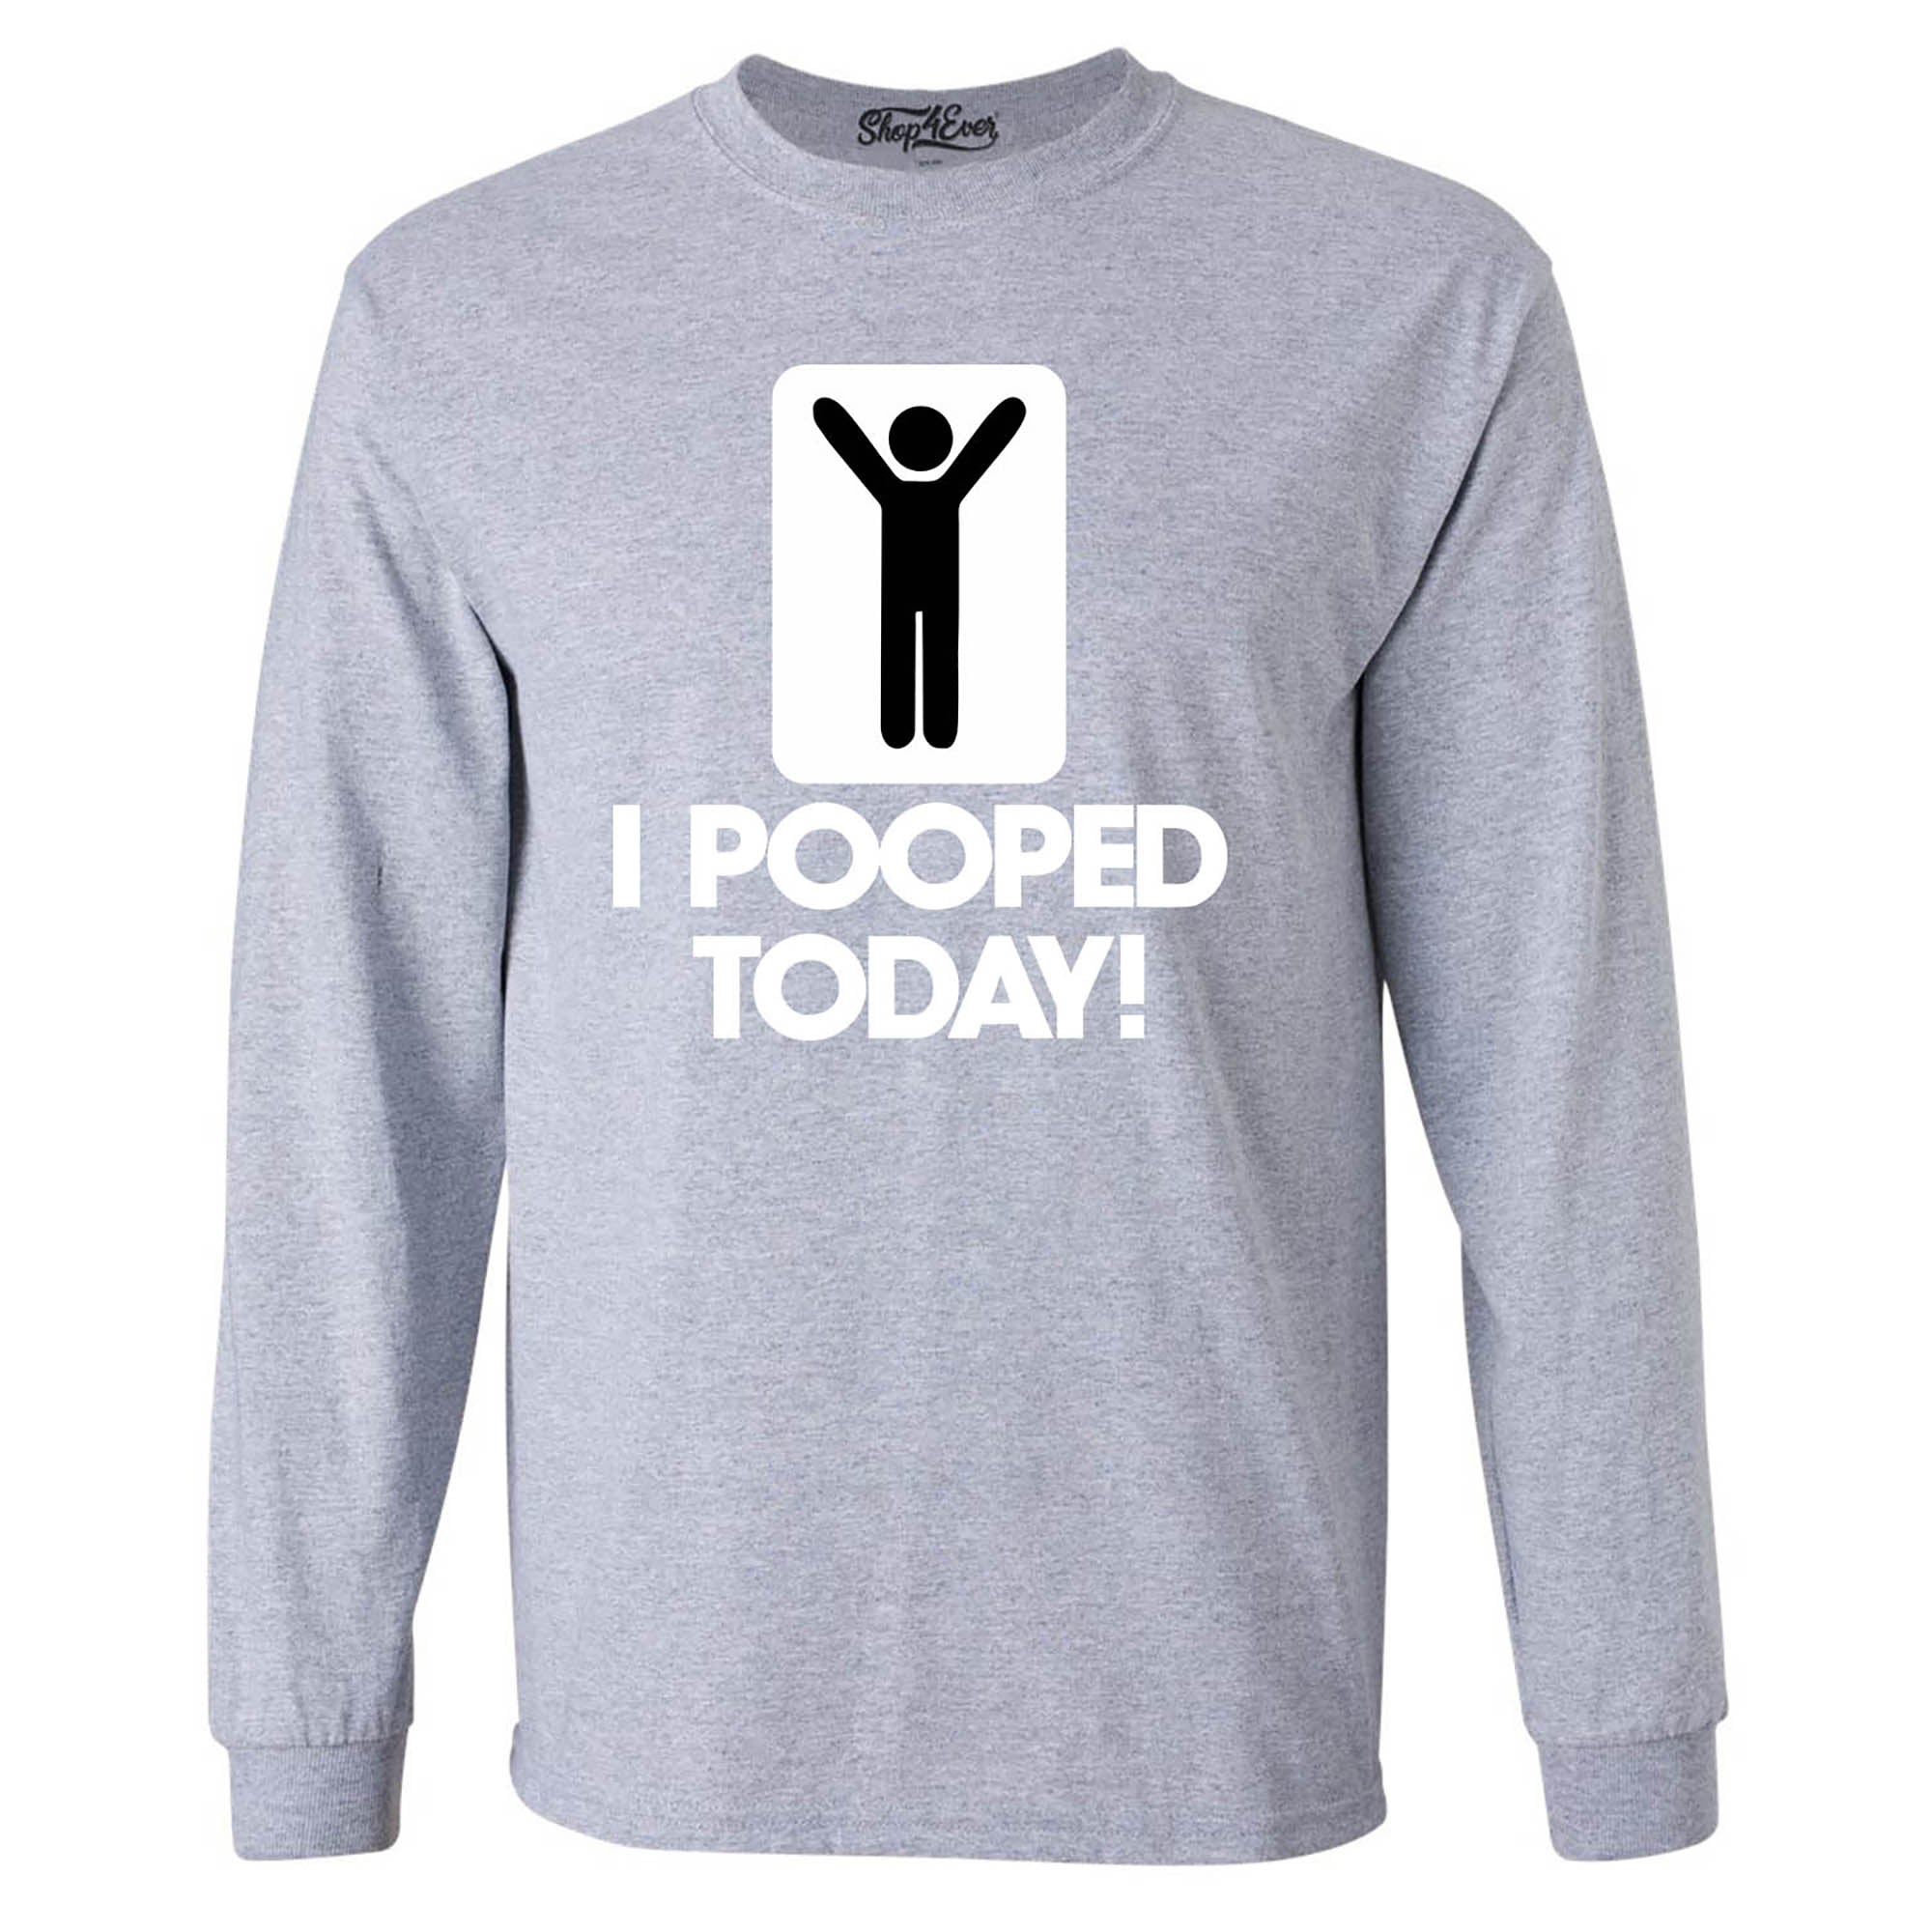 I Pooped Today Long Sleeve Shirt Funny Shirts